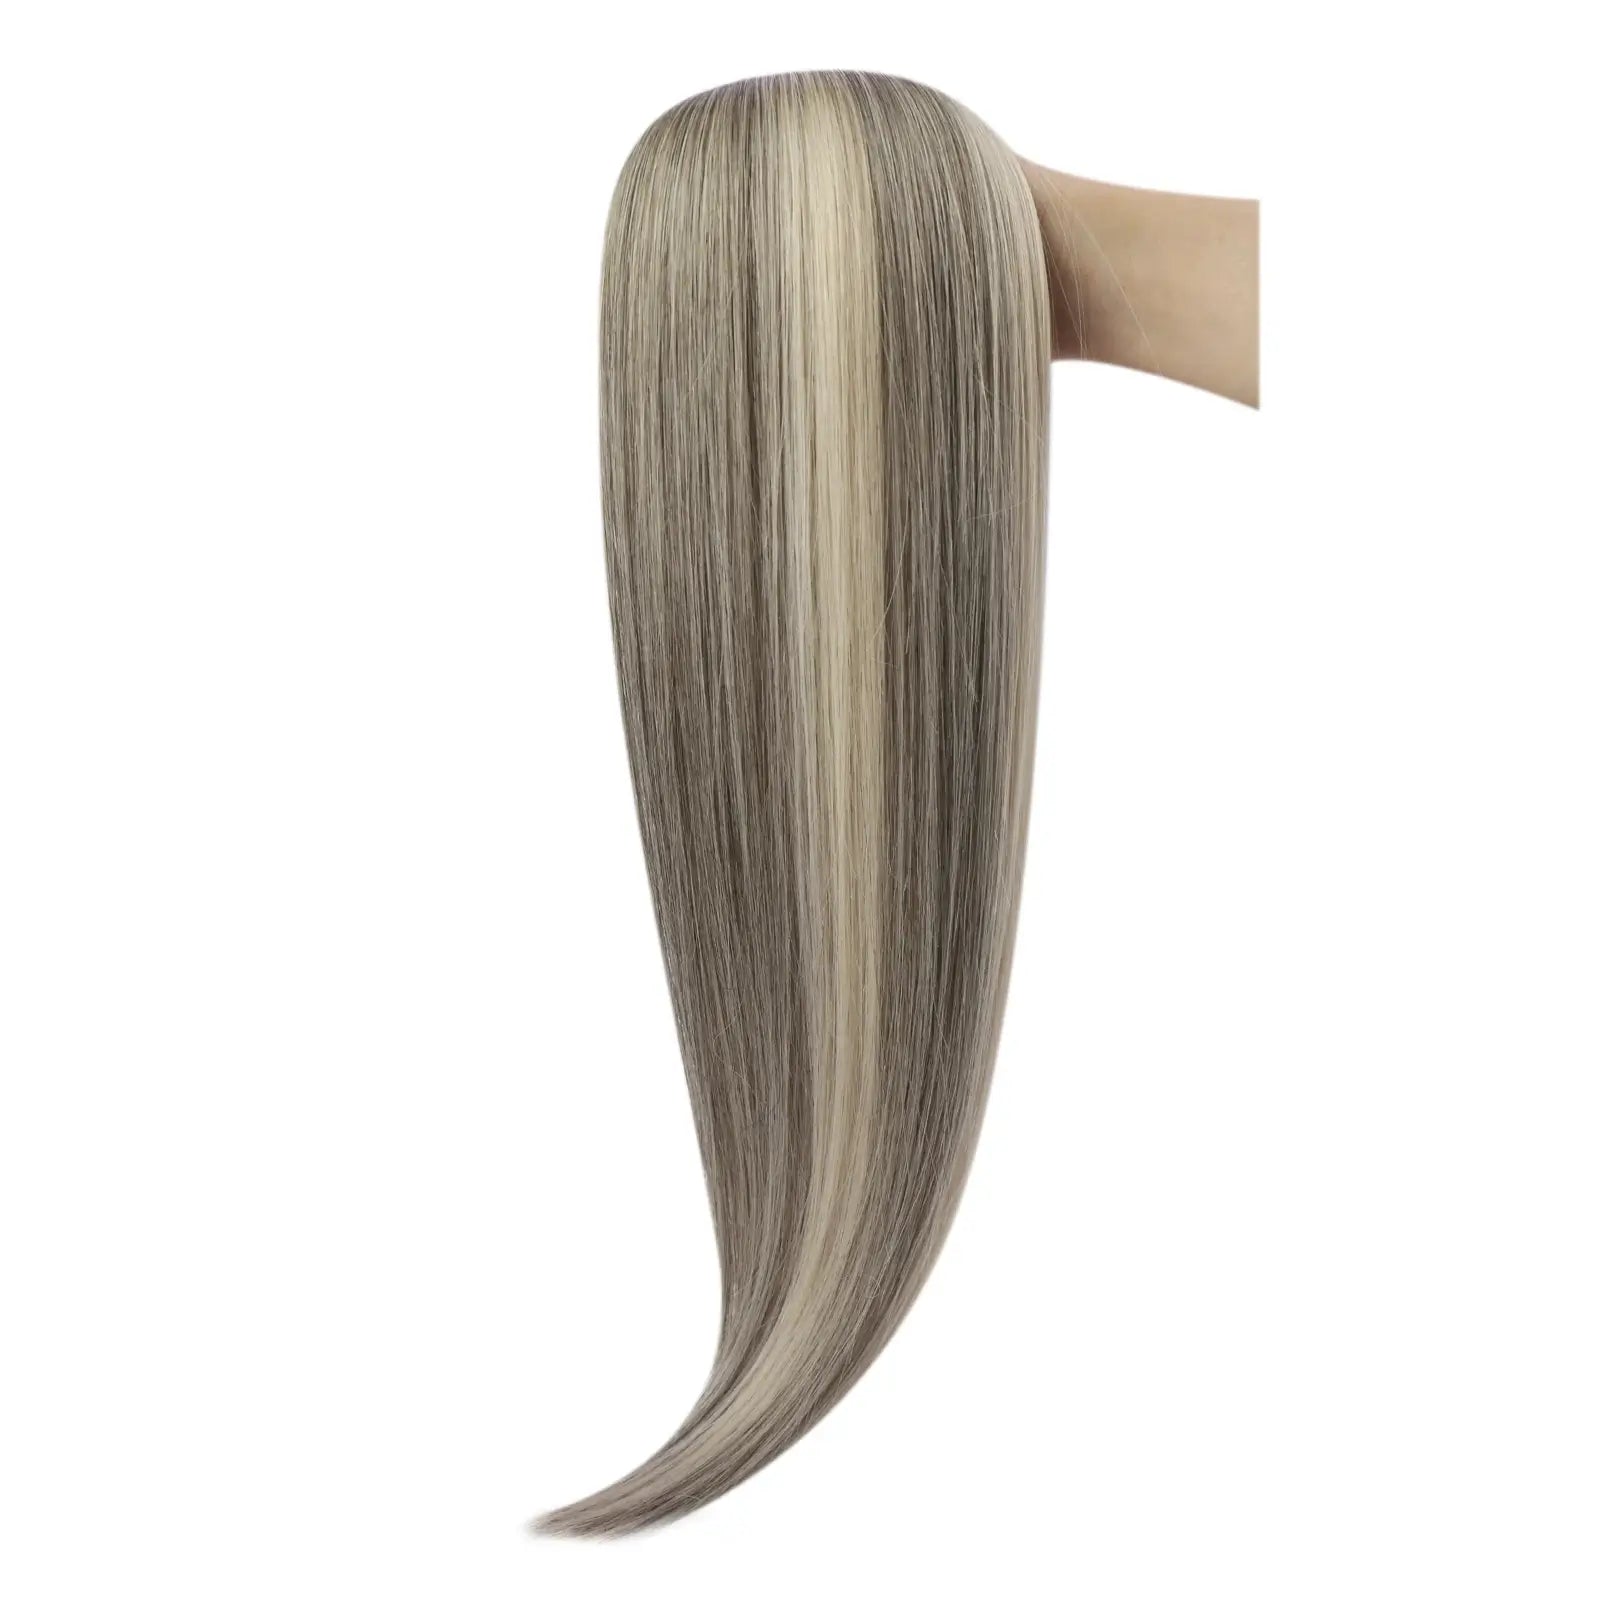 High quality seamless injection tape hair extension with lightweight appearance